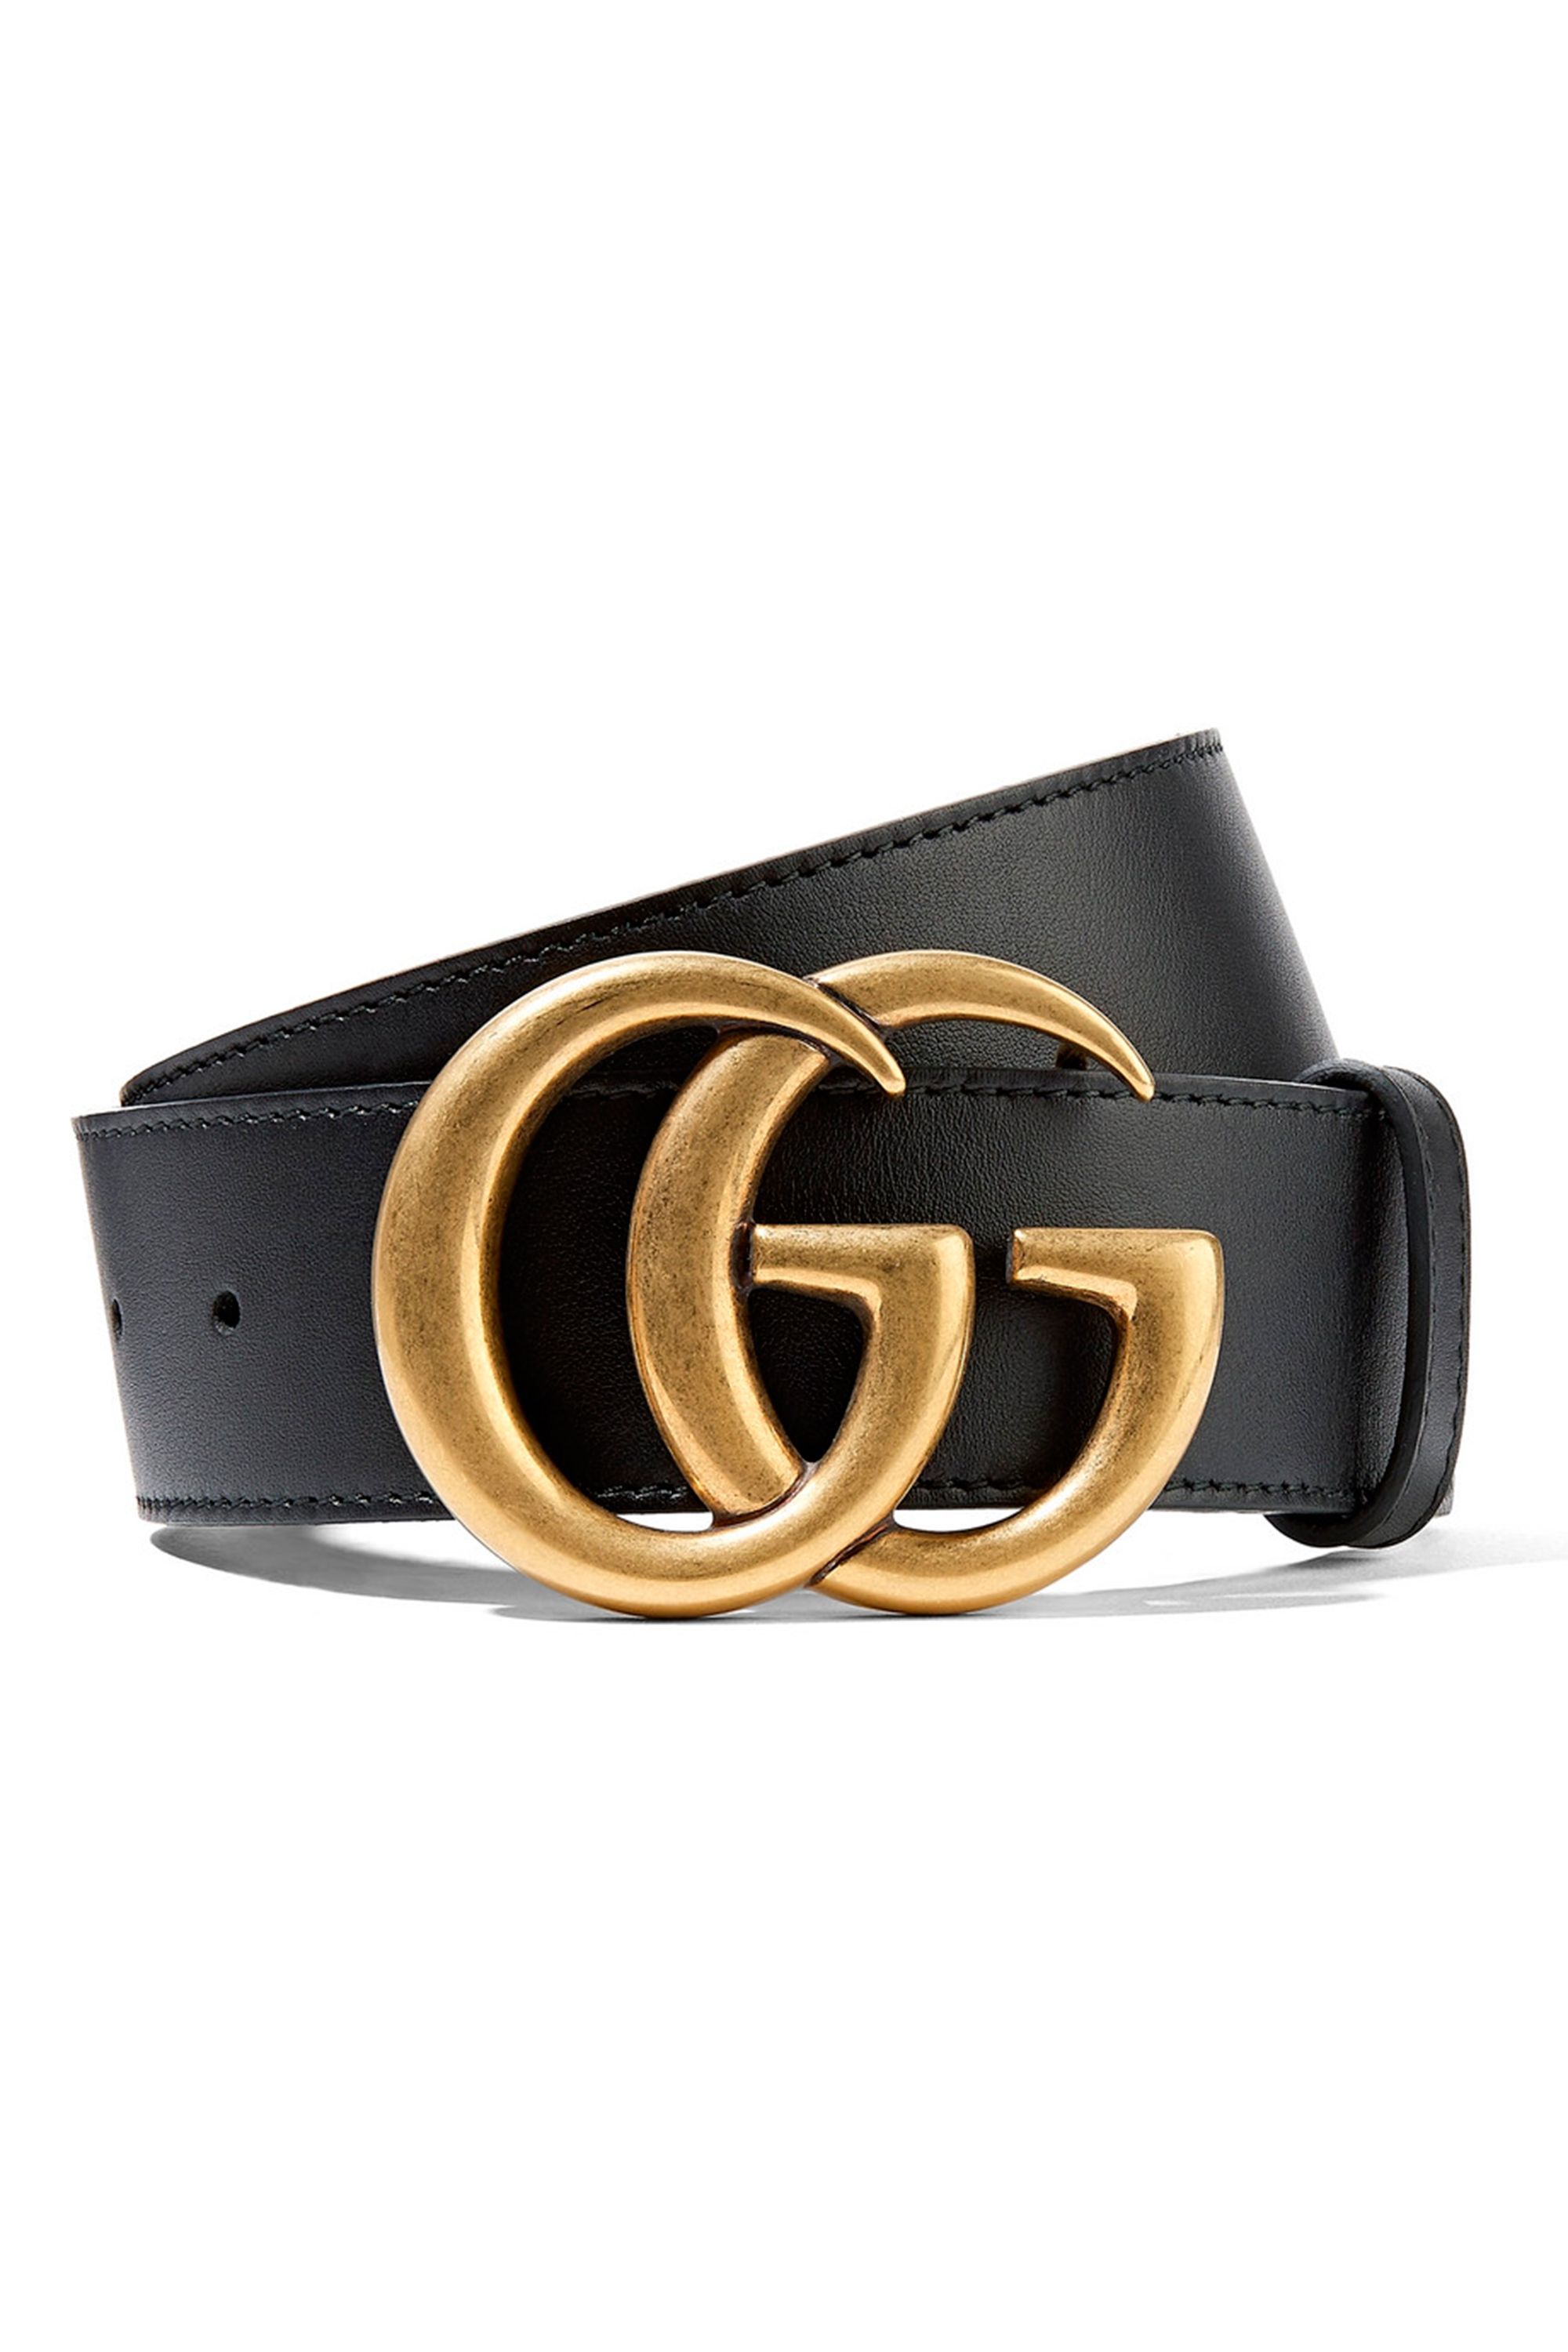 270 Gucci belt is most desired product of year, says Lyst